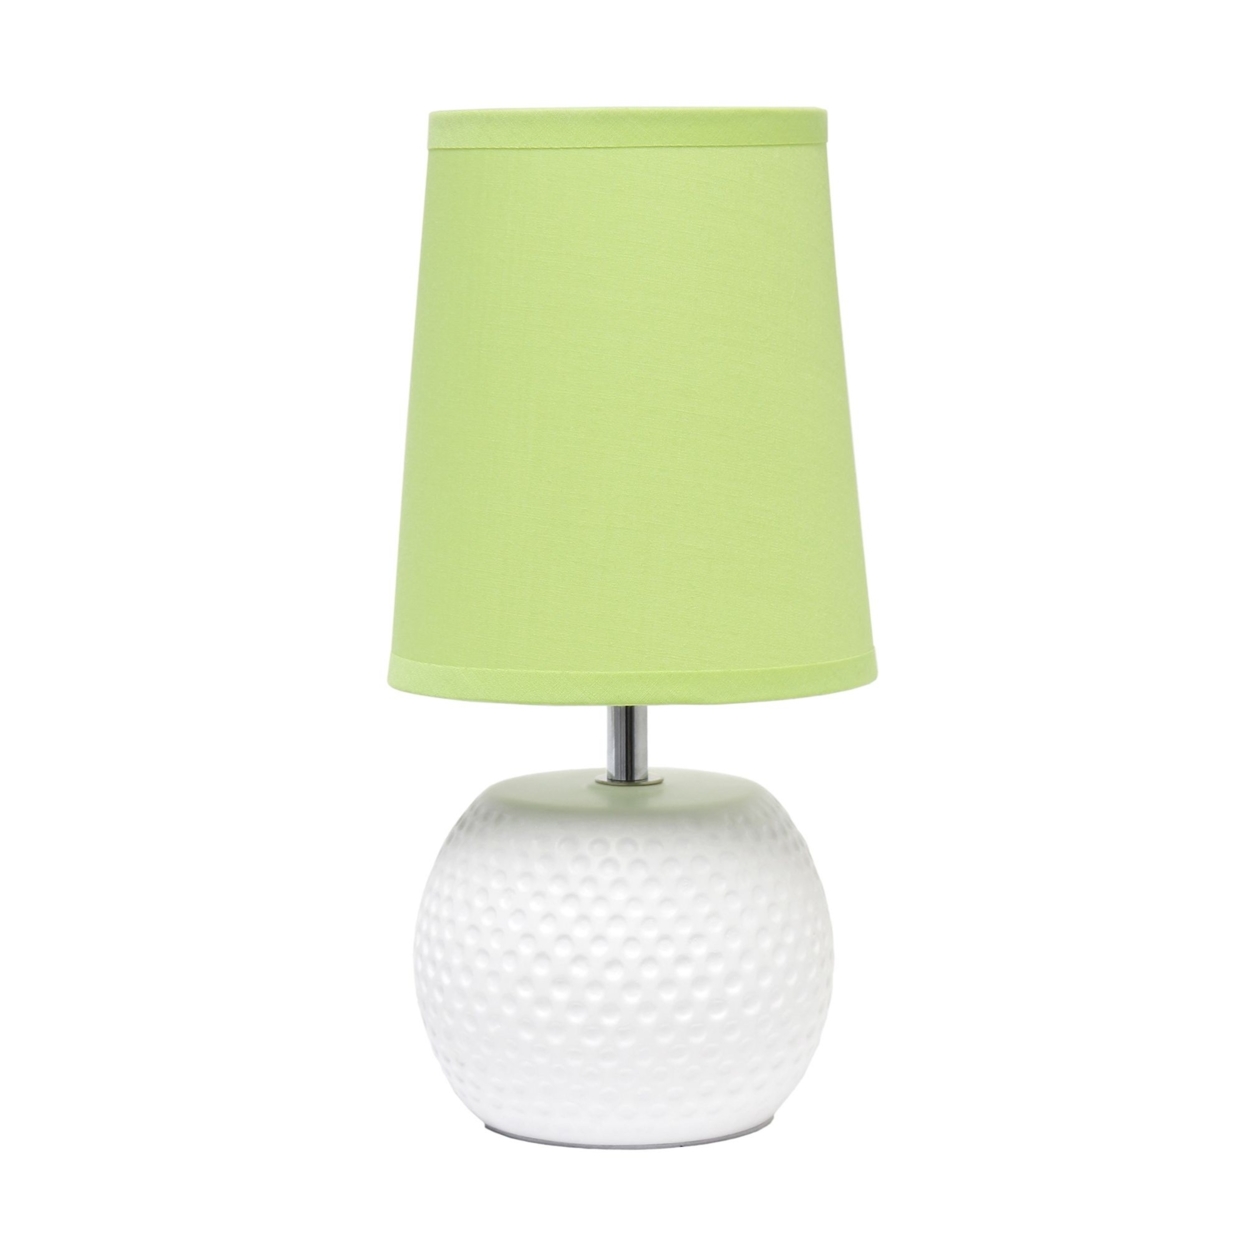 Simple Designs Studded Texture Ceramic Table Lamp, Green